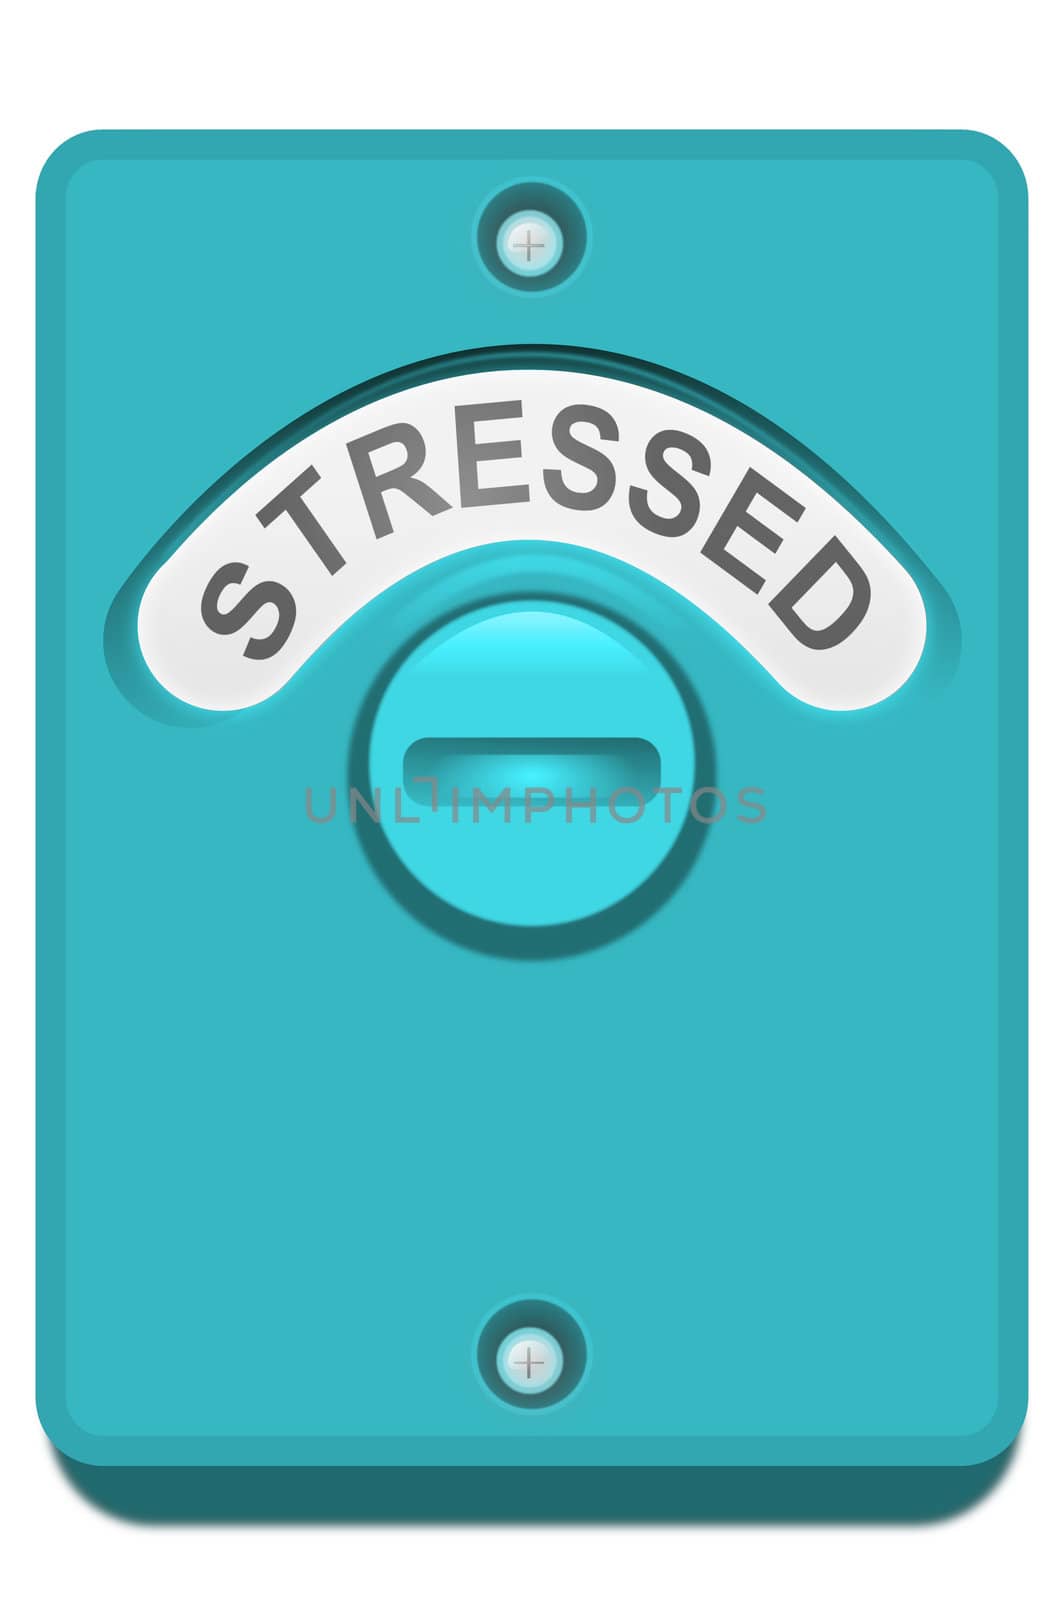 Illustration of a blue toilet door turning lock with the 'stressed' word position showing. White background.